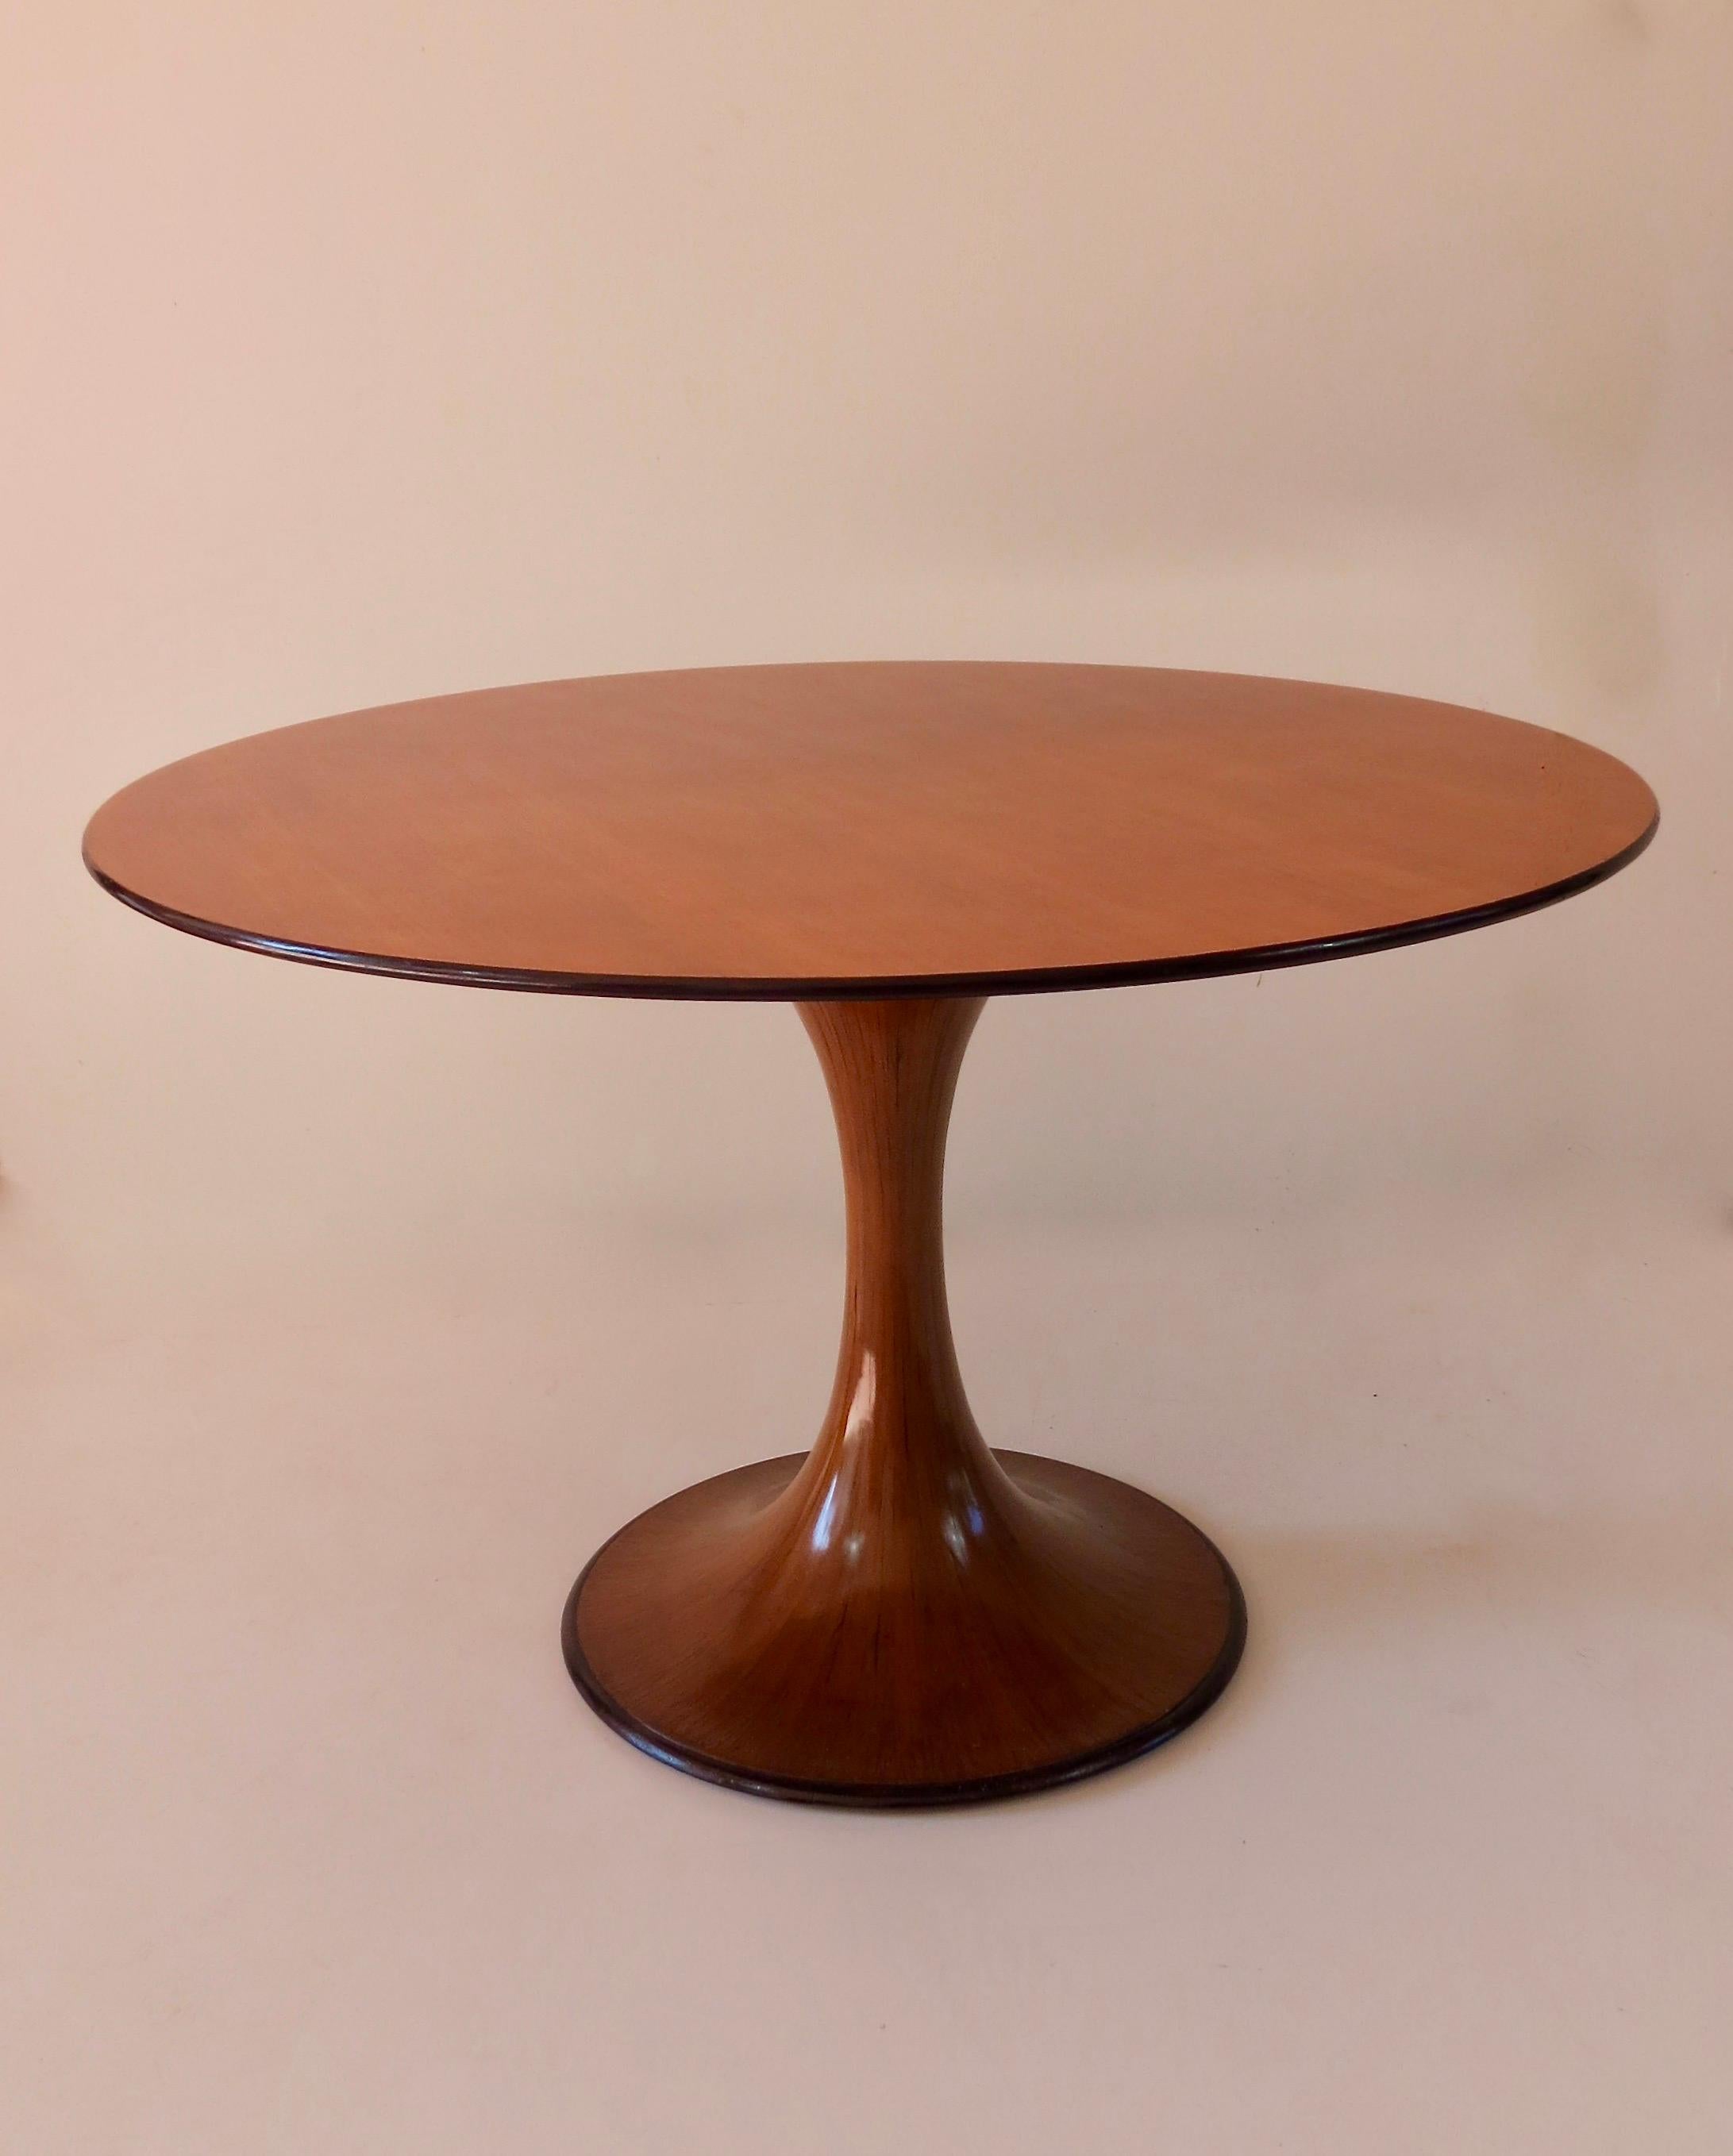 Round pedestal dining table named 